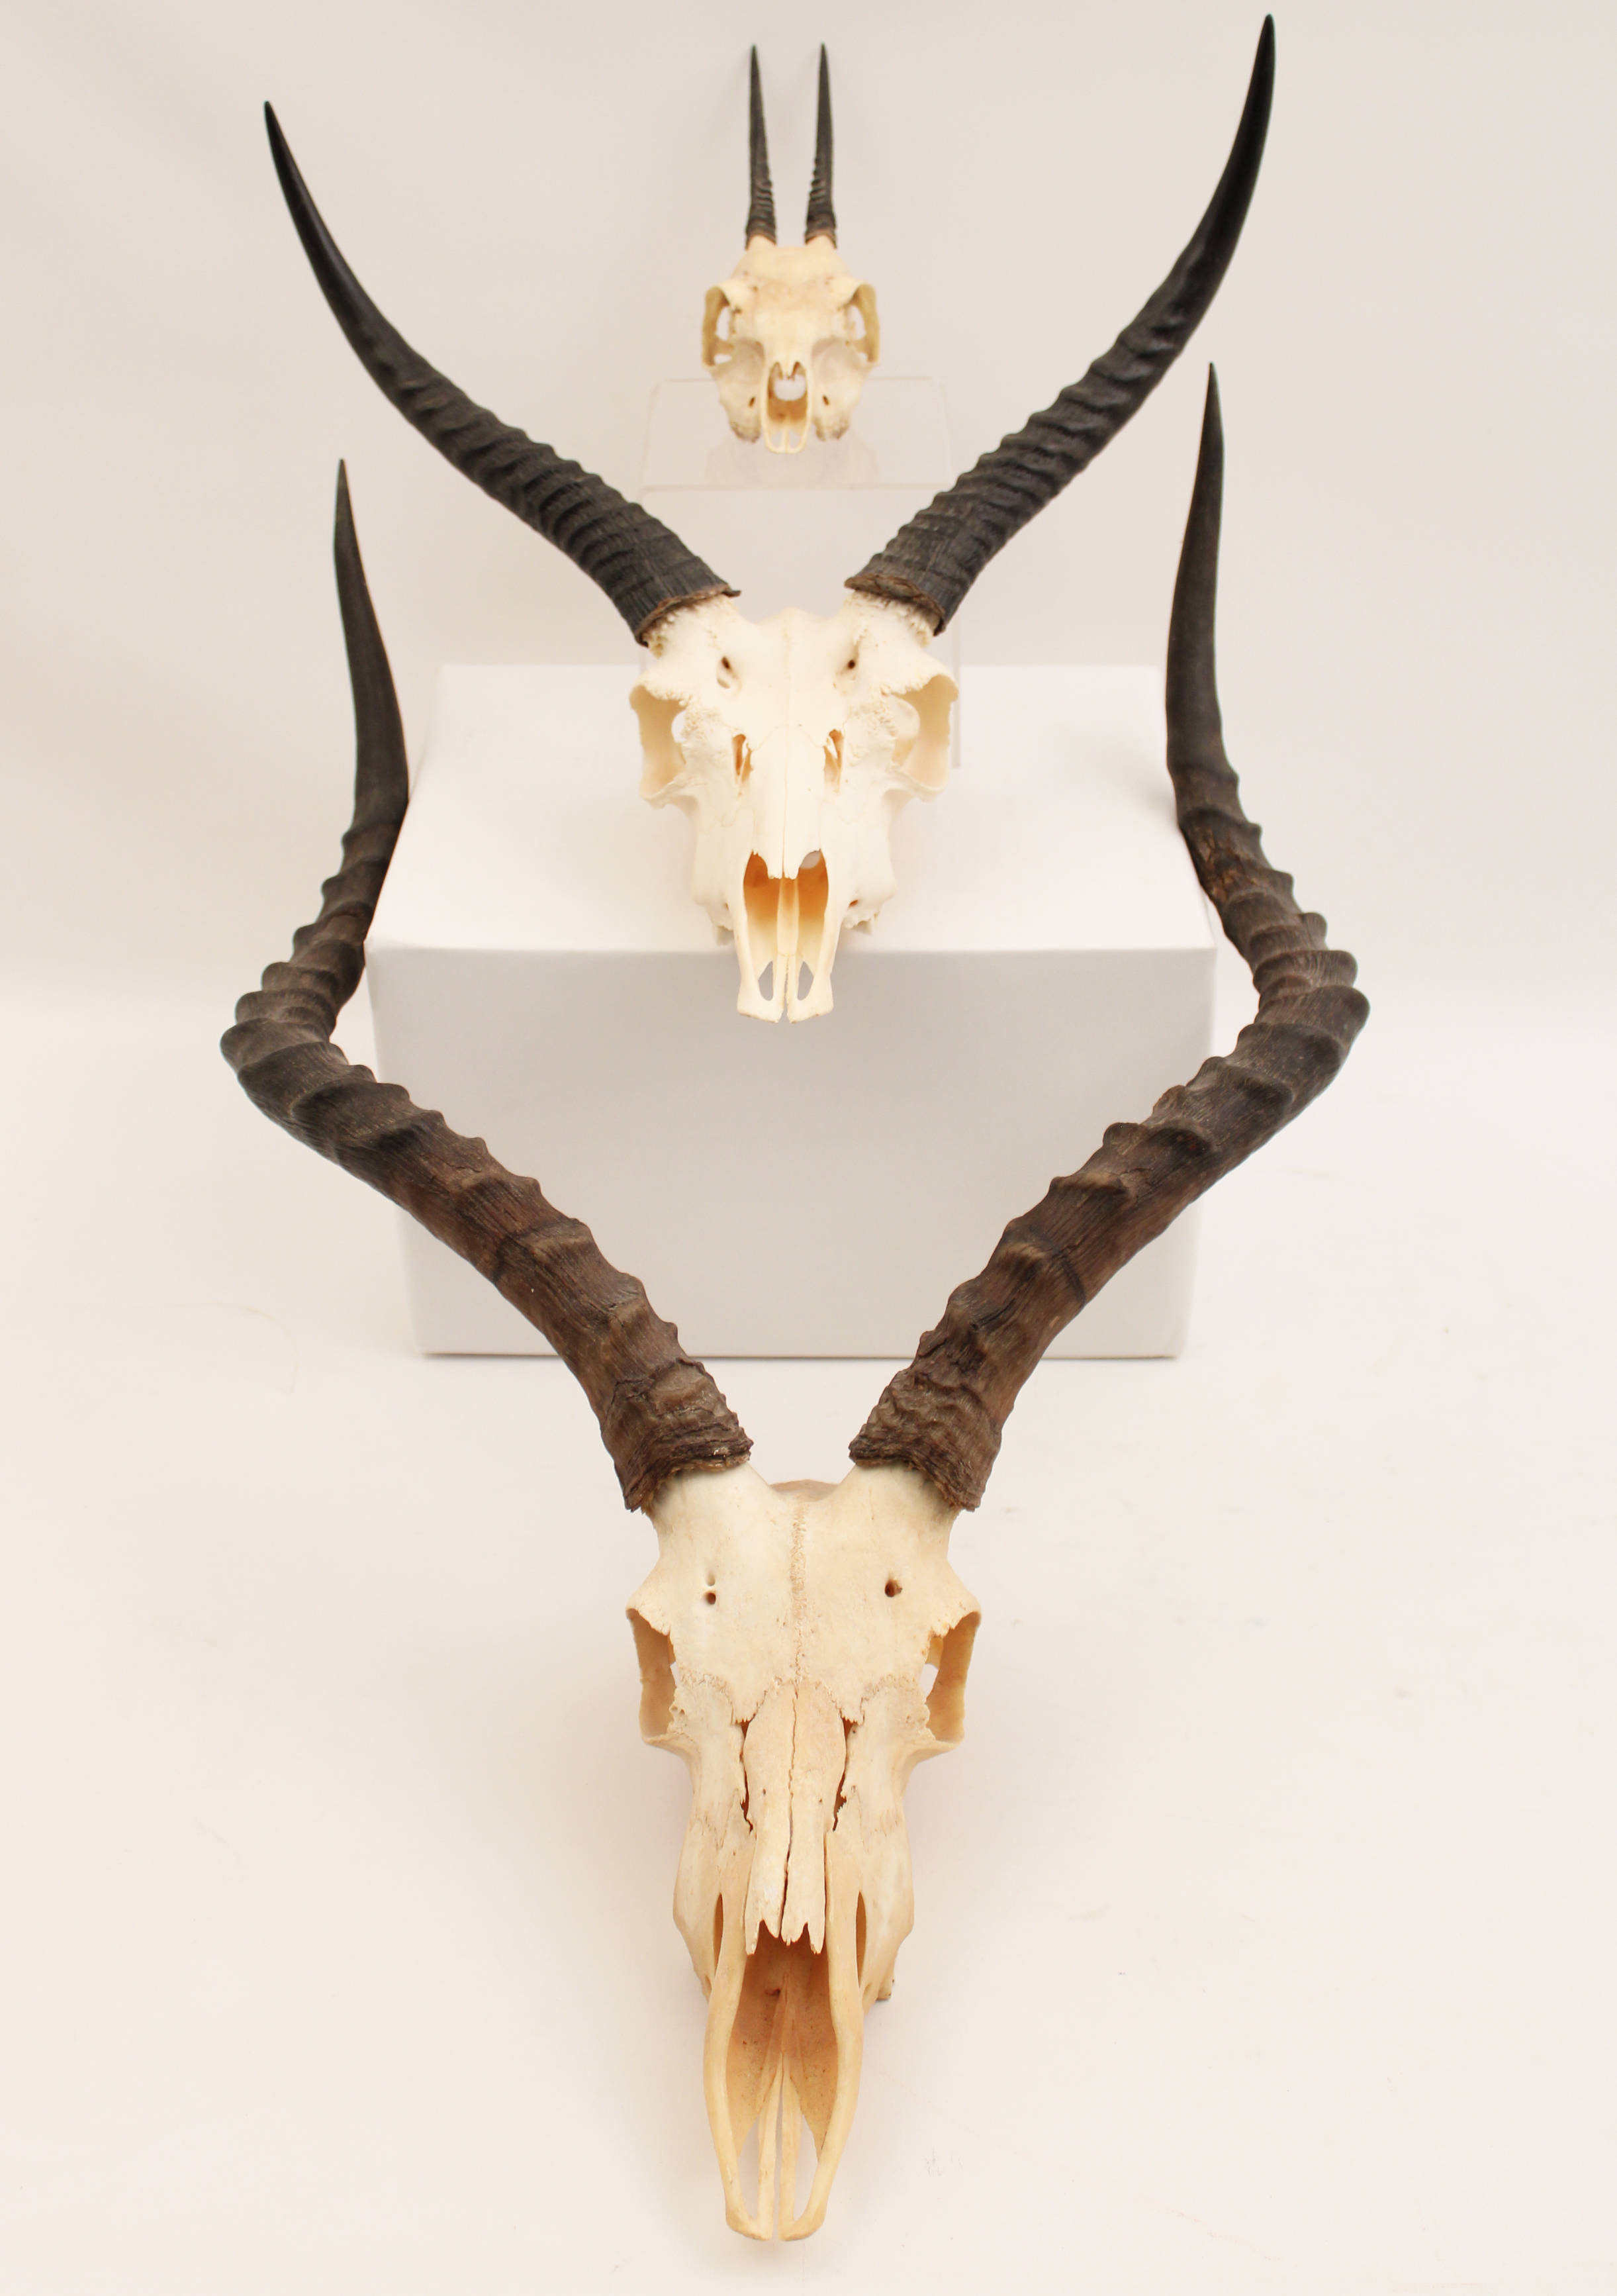 GROUP OF 3 AFRICAN GAME SKULLS